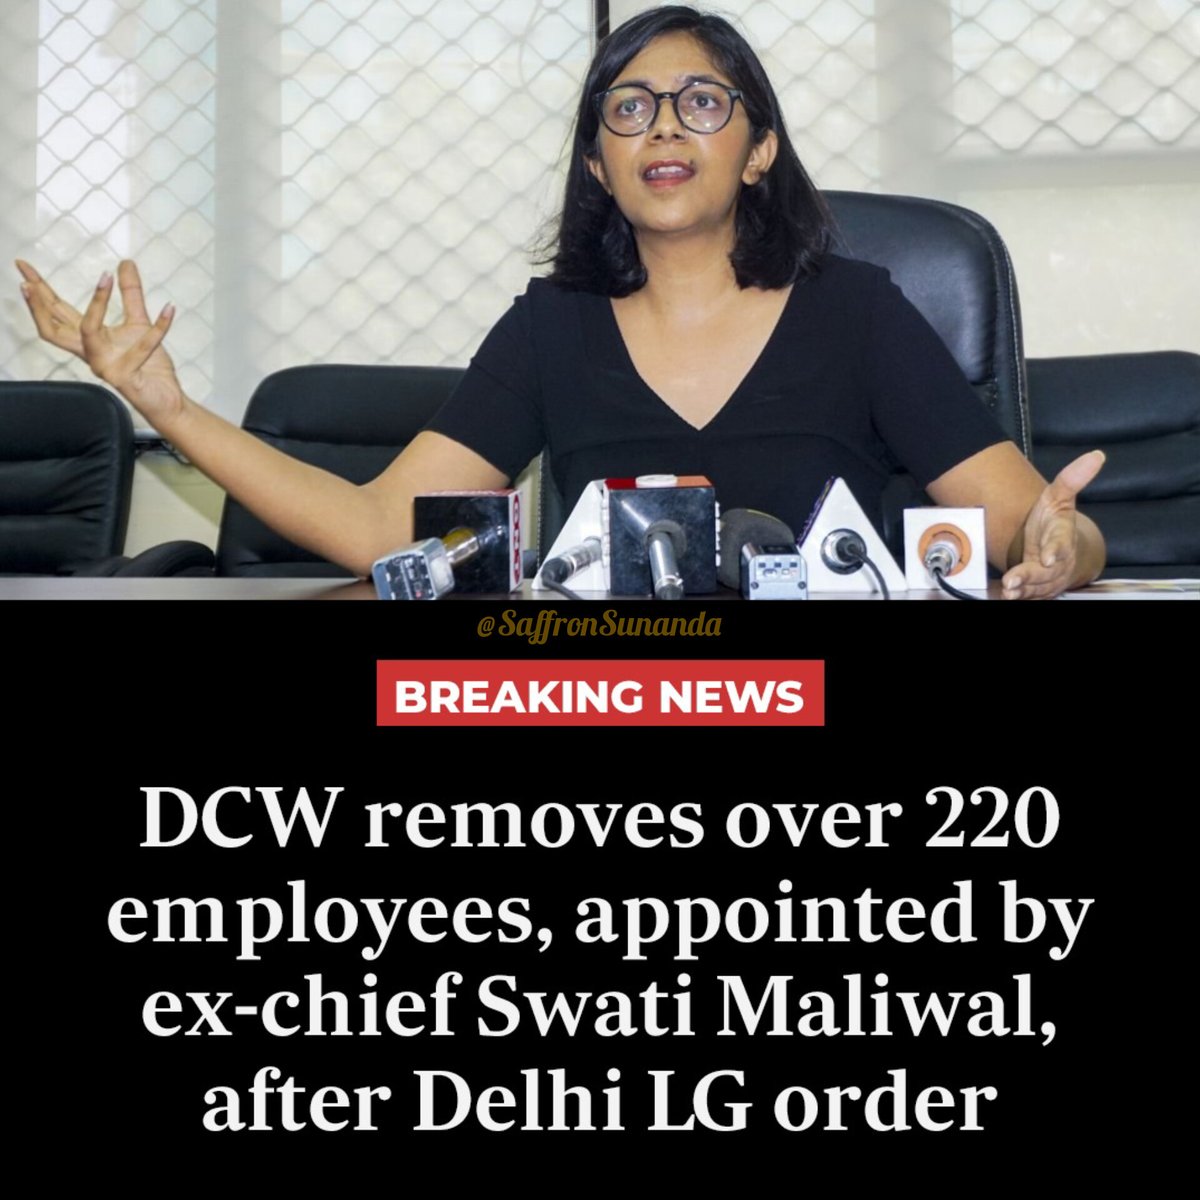 Recruitment scam by for AAP?

The LG of Delhi ordered to removal of 223 employees from Delhi Women commission illegally appointed by #SwatiMaliwal 

She appointed them against the rule and without the permission of LG.

Everyday a new scam by Arvind Kejriwal gang.